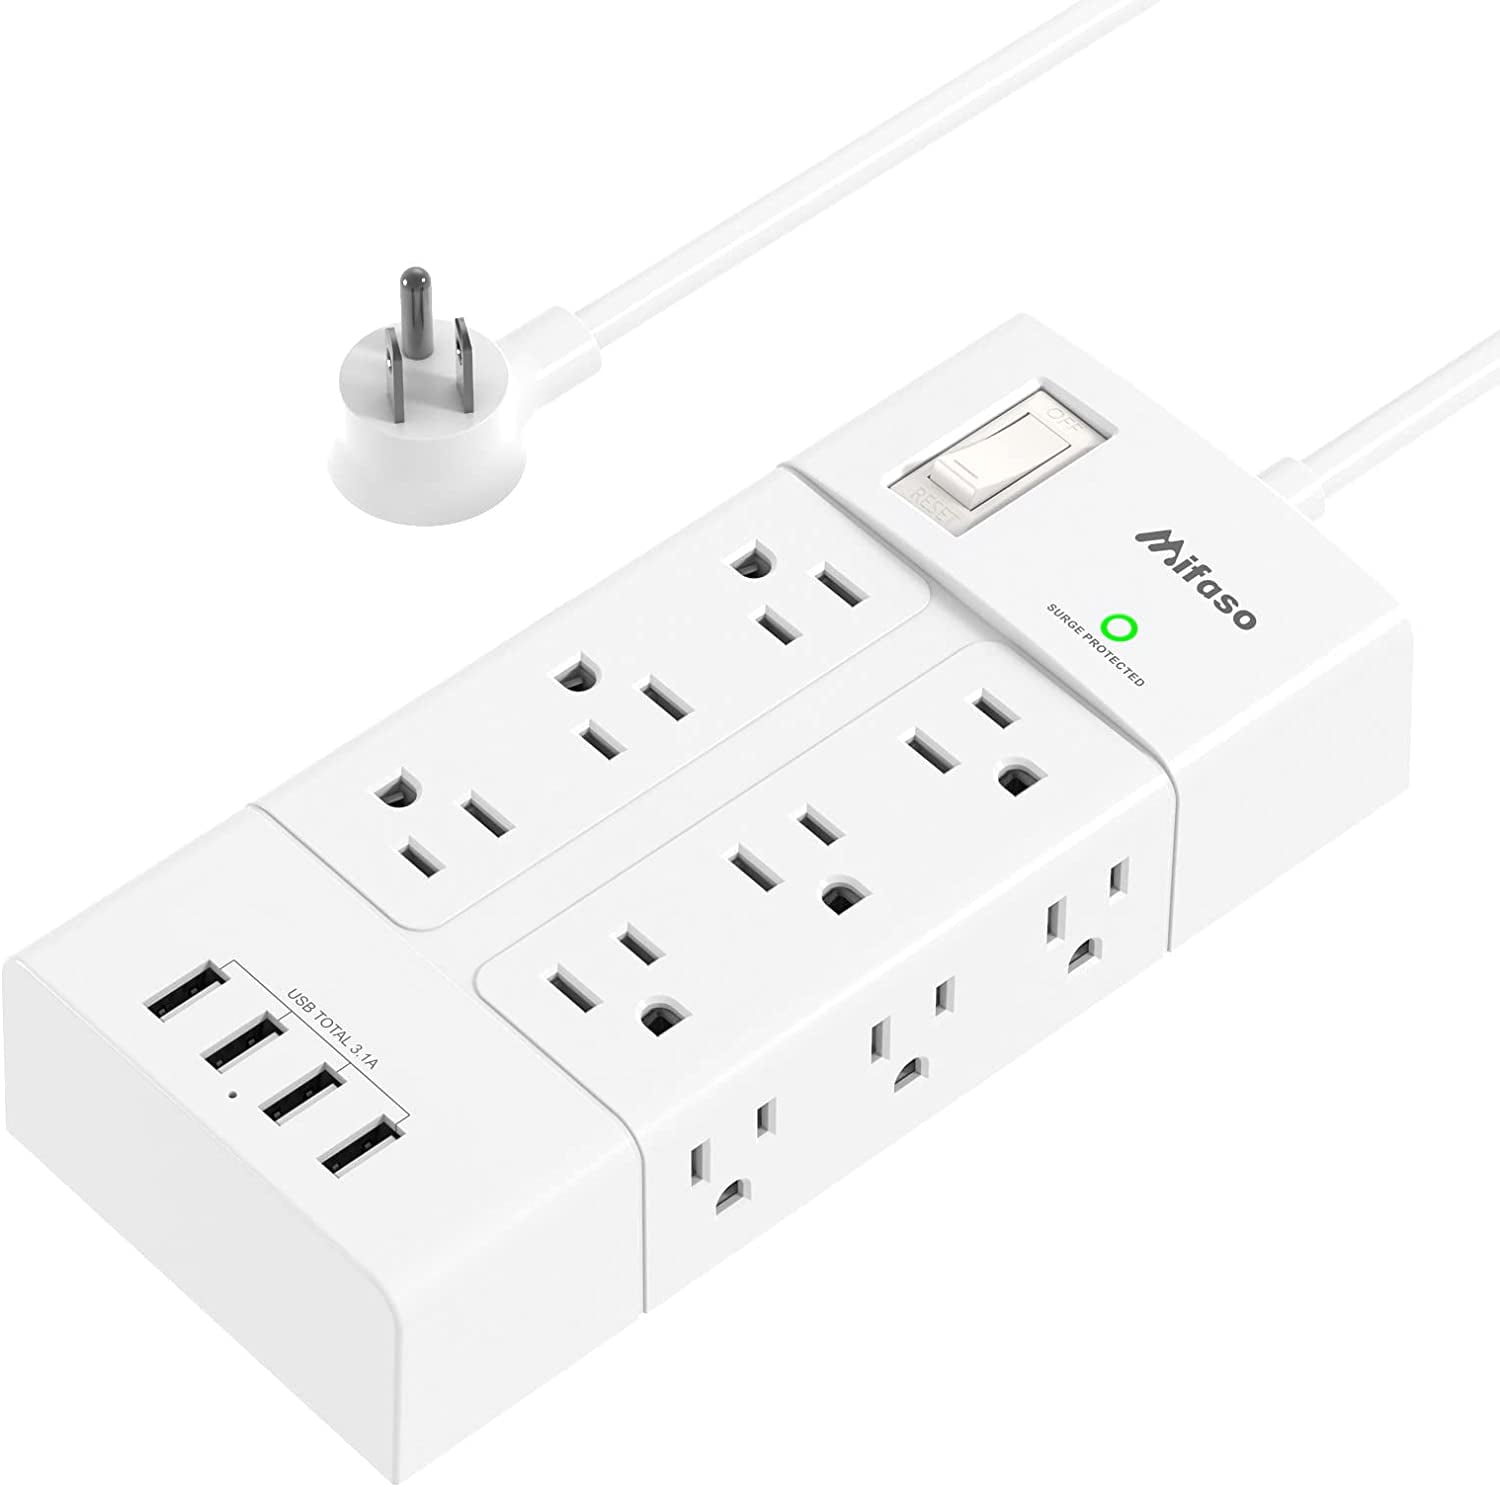 12 Outlet USB Power Strip Surge Protector 5 ft Long Extension Cord 15A Flat Plug